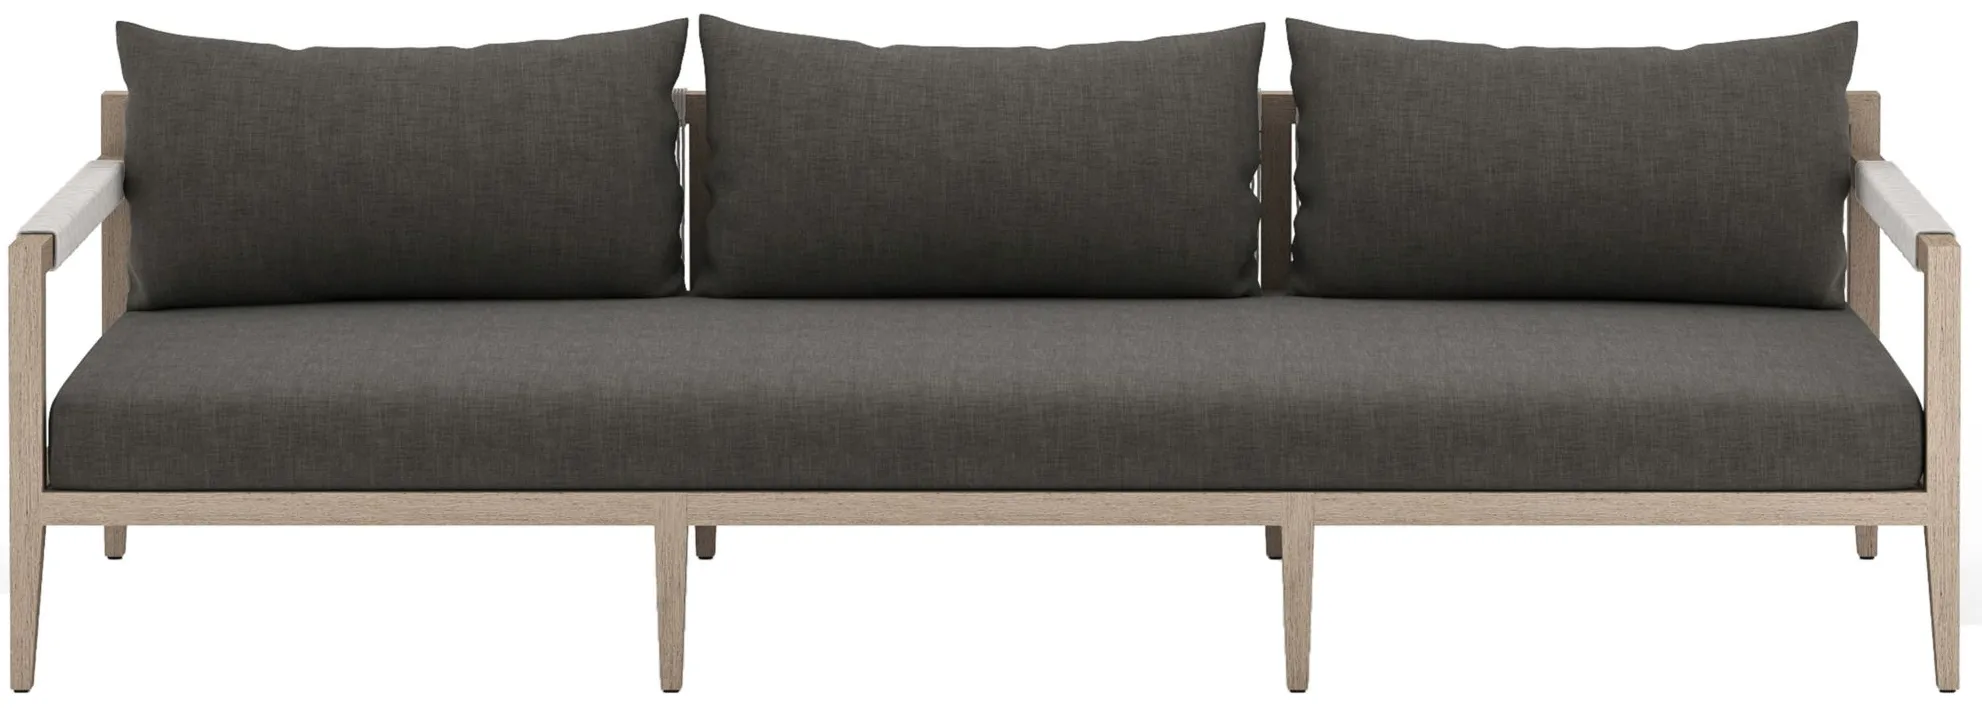 Solano Outdoor Sofa in Natural & Beige by Four Hands